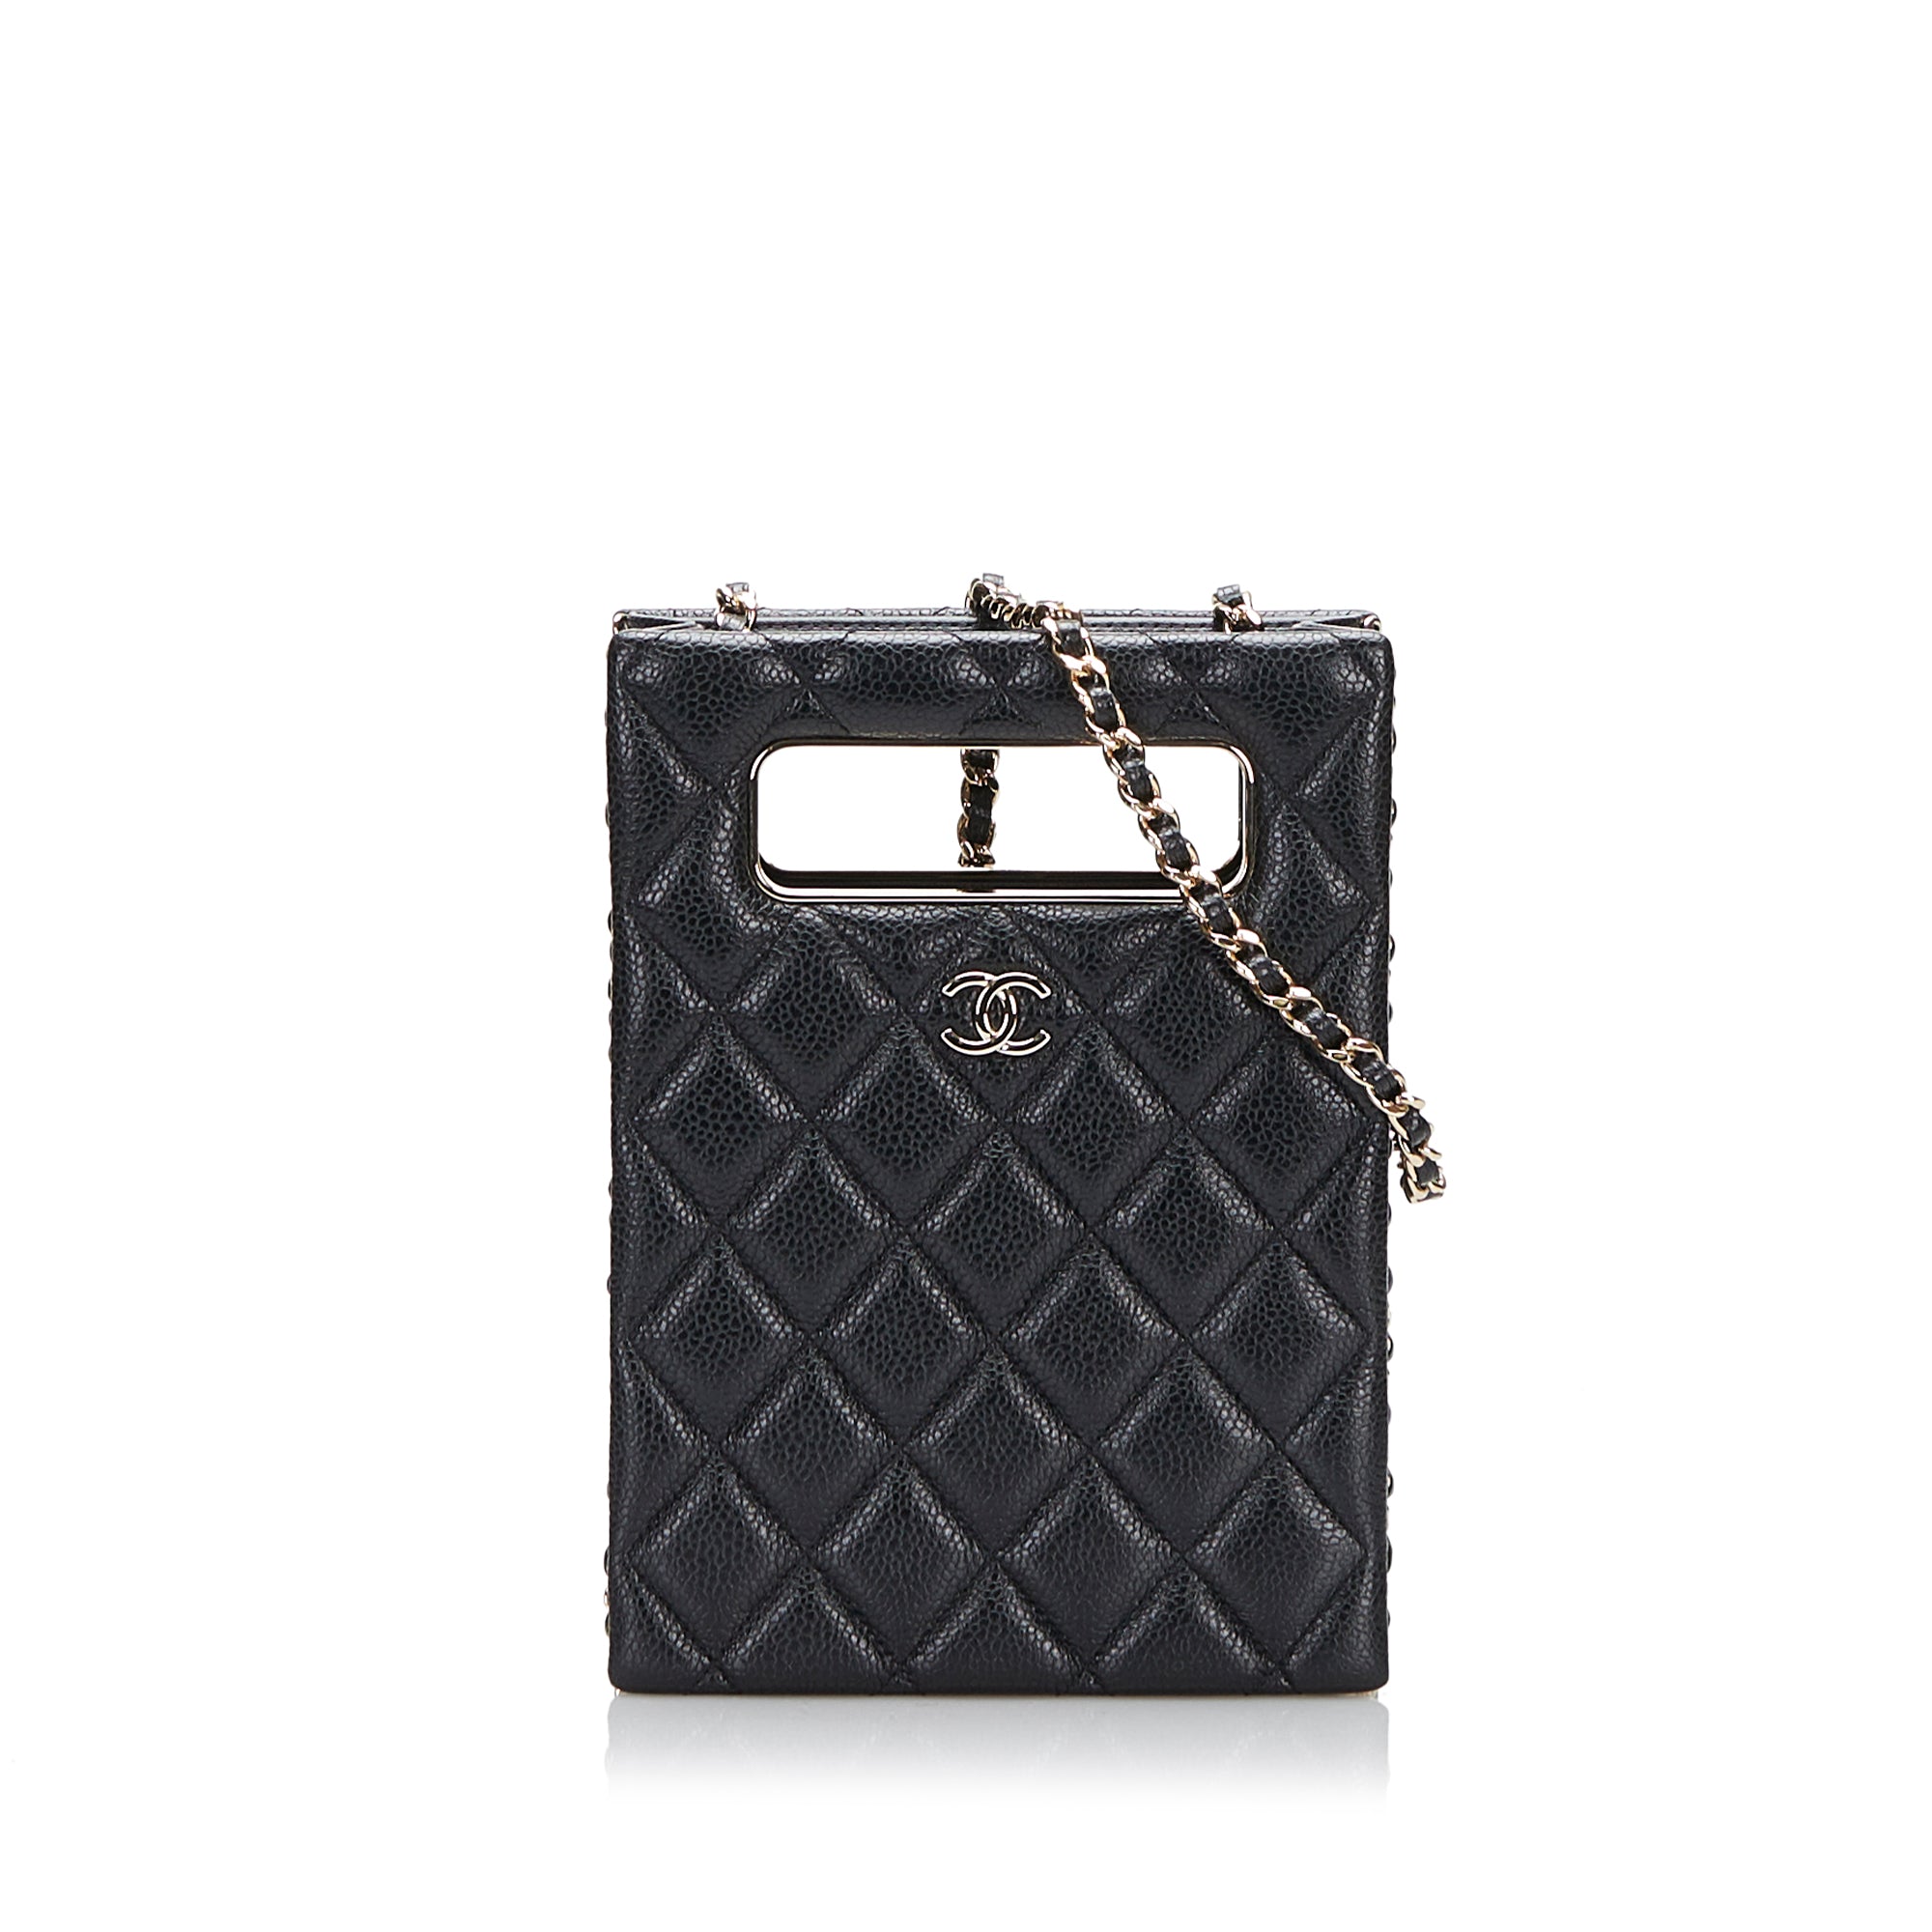 Black Chanel Quilted Evening Bag, Borsa Chanel Timeless in pelle  trapuntata a zigzag nera